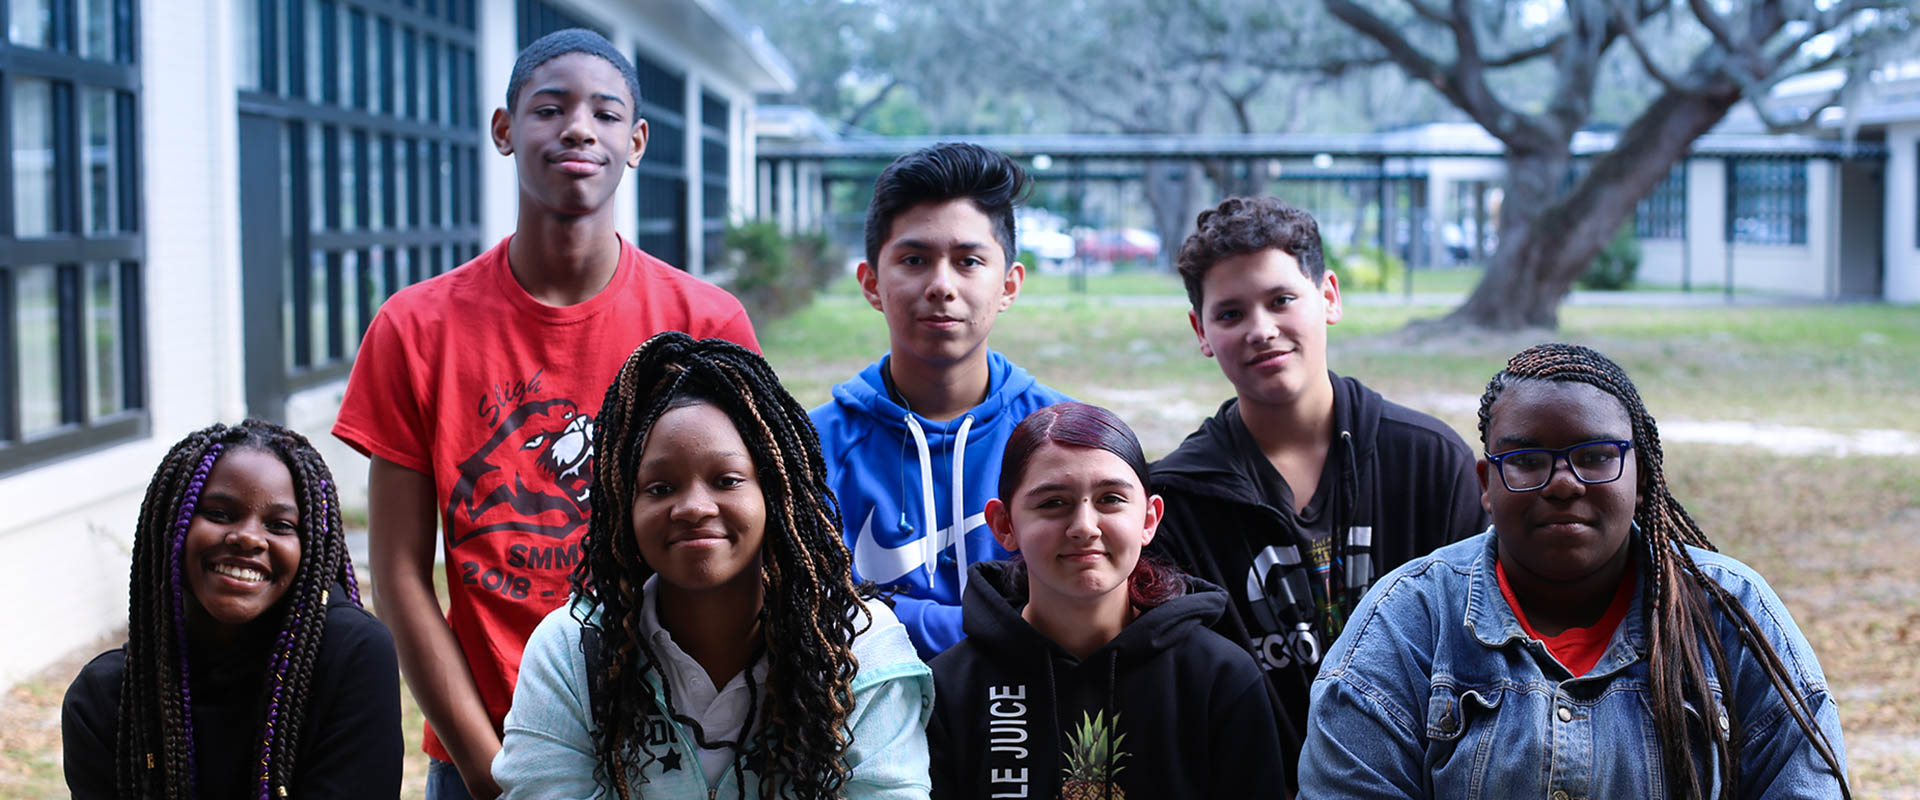 Group of 7 students standing outside in school courtyard, four people in front, three people standing behind, Hillsborough Education Foundation